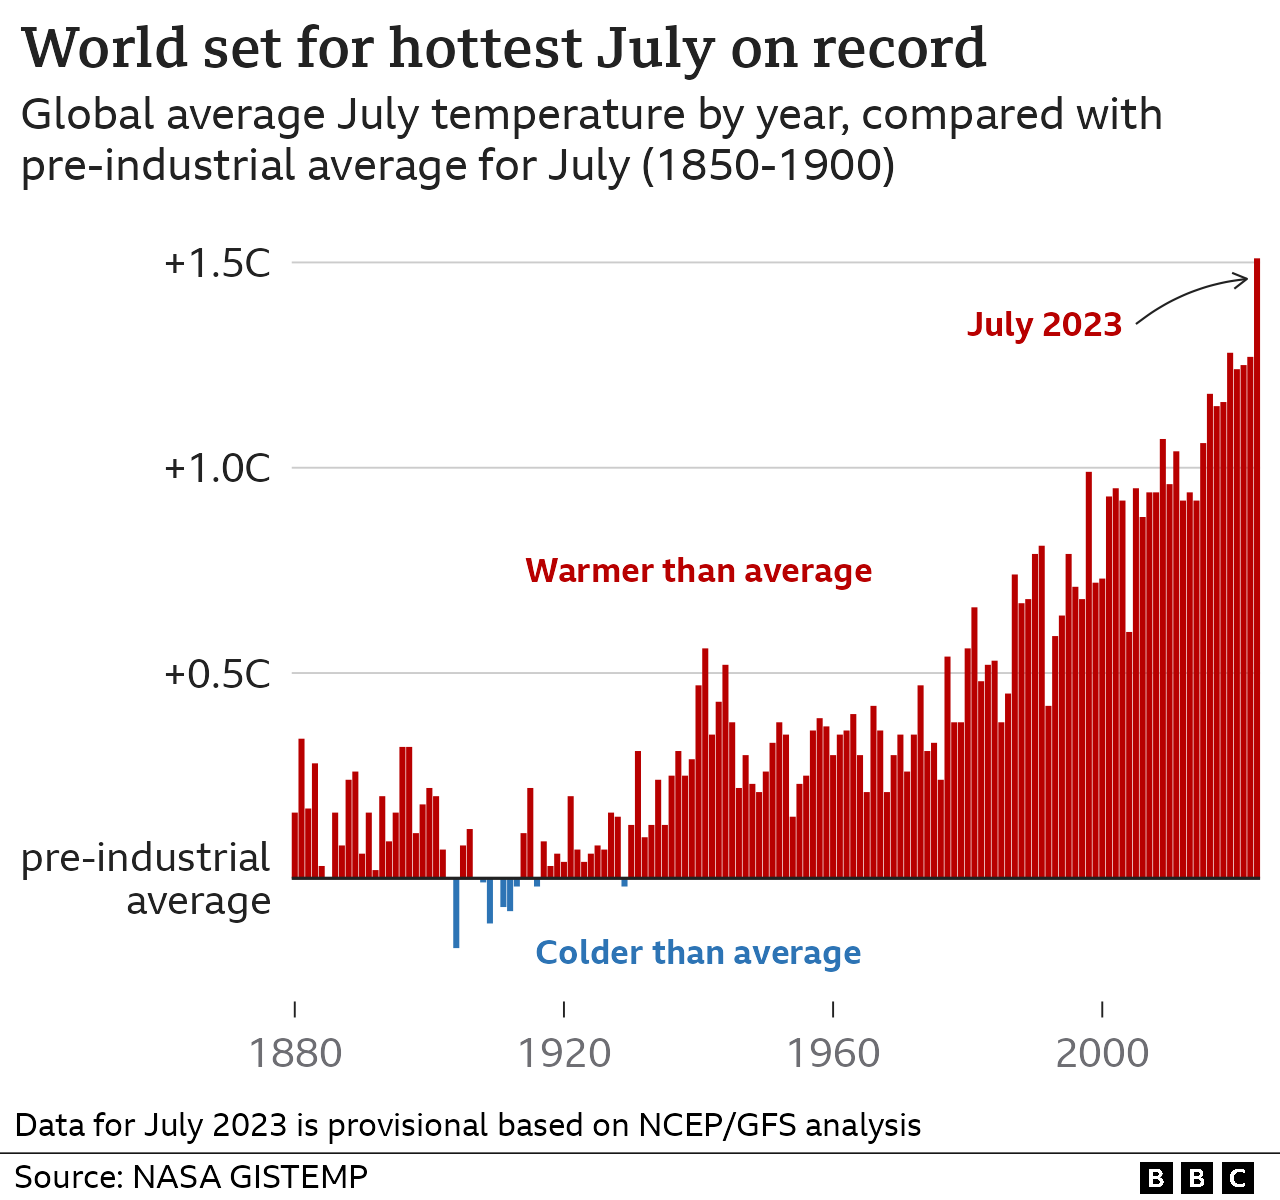 Bar chart showing the difference between the average July temperature each year against the pre-industrial reference period, 1850-1900. Provisional data for July 2023 is about 1.5C above the average